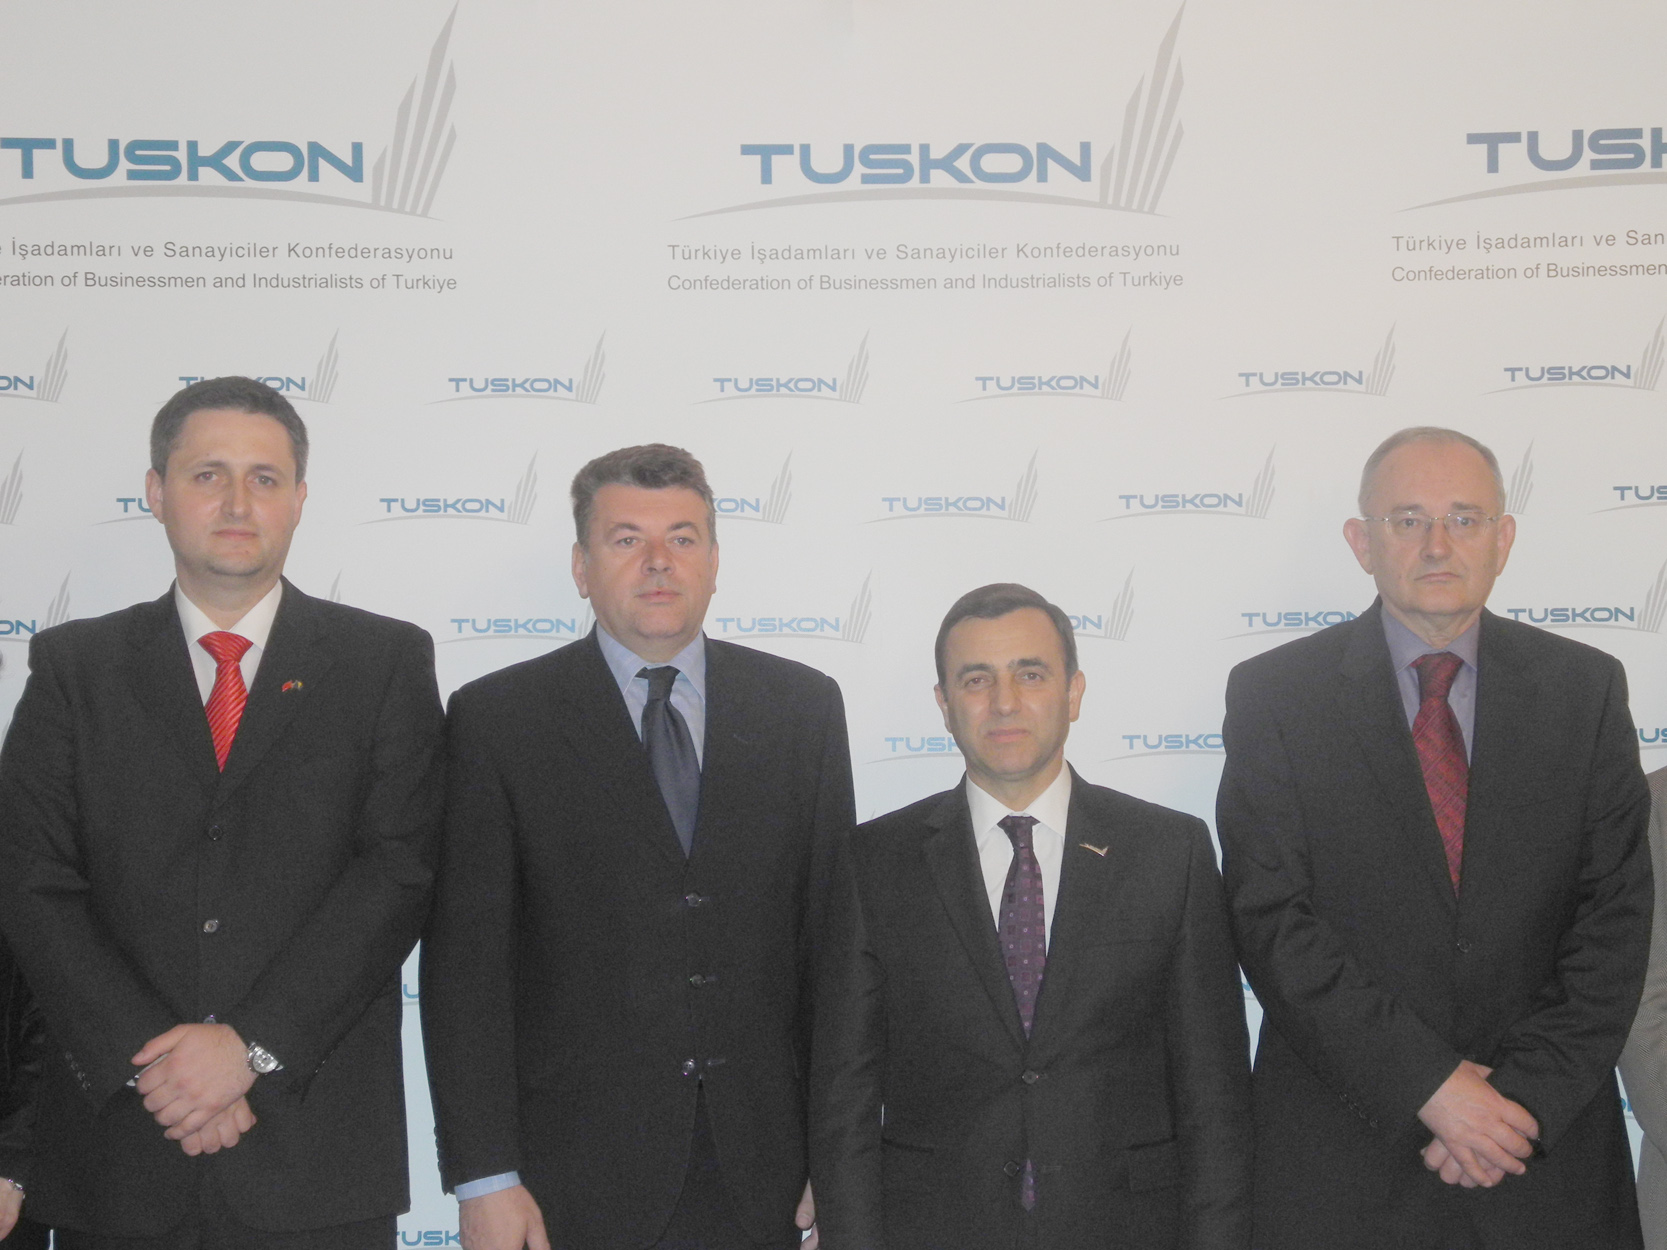 The Collegium of the House of Representatives spoke with representatives of the Confederation of businessman and Industrialists of Turkey TUSKON